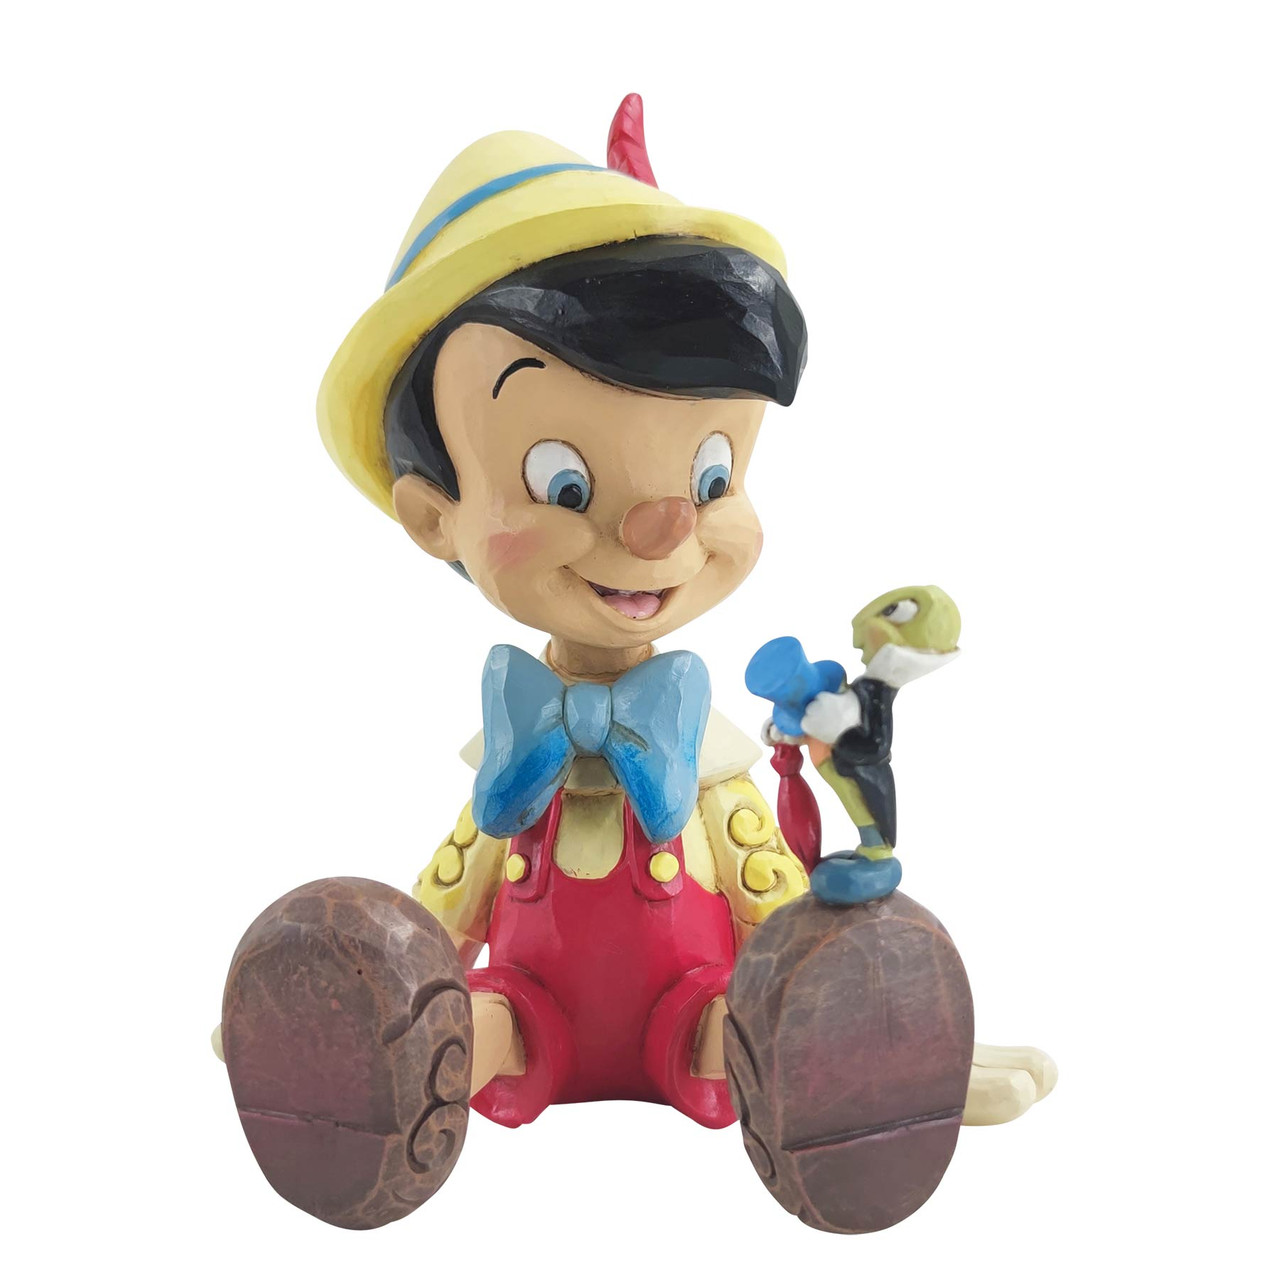 Disney Traditions Pinocchio and Jiminy Cricket Sitting Figurine by Jim Shore